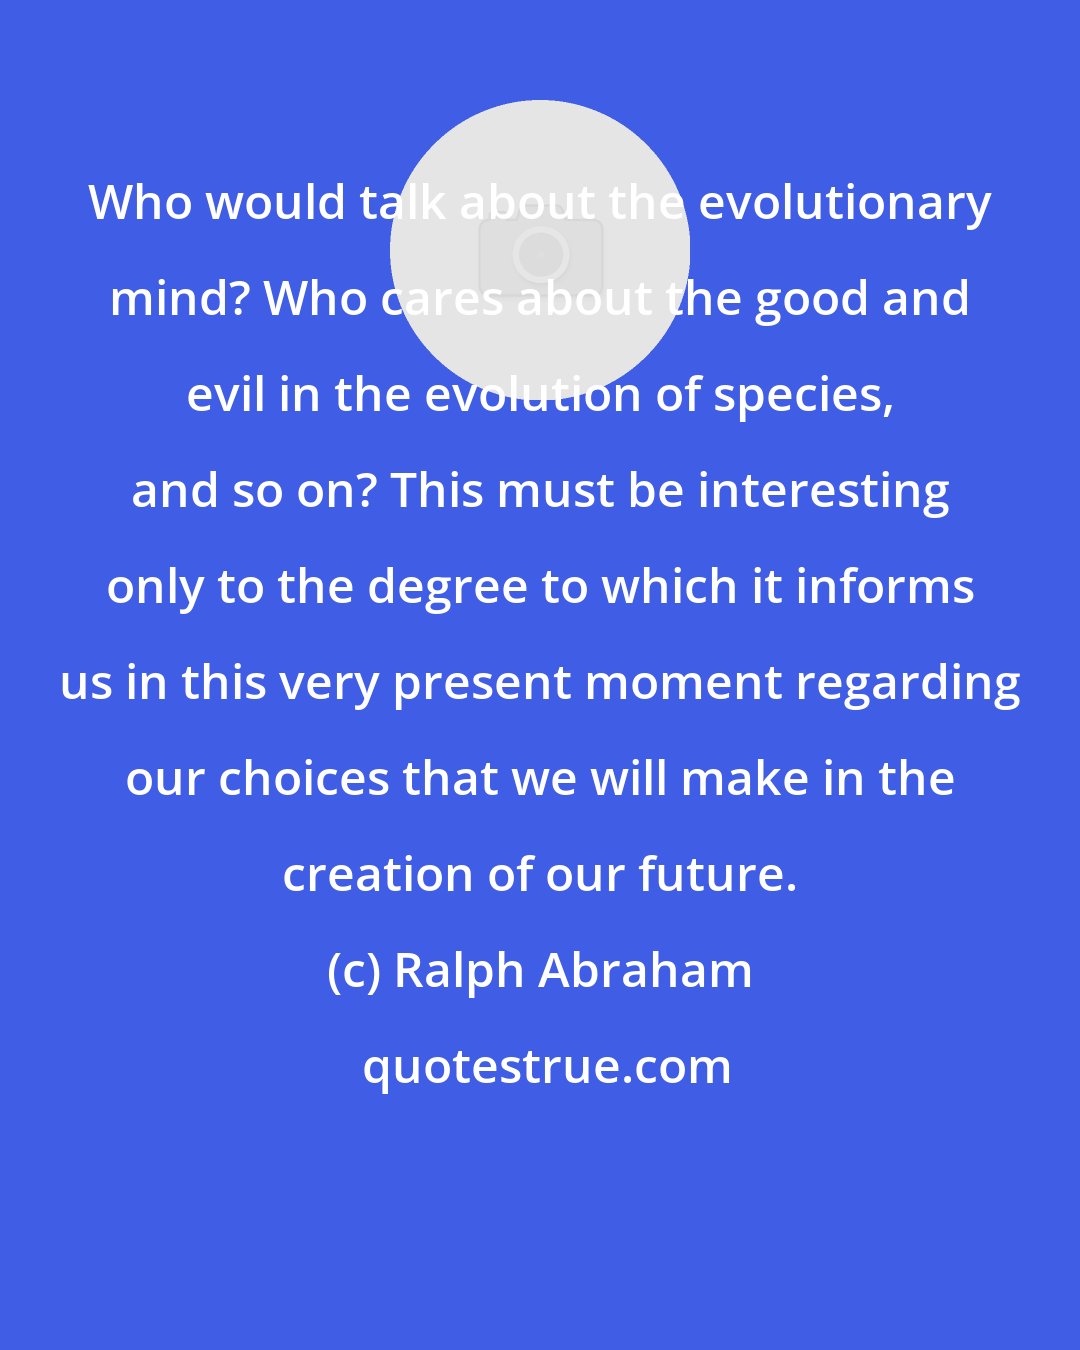 Ralph Abraham: Who would talk about the evolutionary mind? Who cares about the good and evil in the evolution of species, and so on? This must be interesting only to the degree to which it informs us in this very present moment regarding our choices that we will make in the creation of our future.